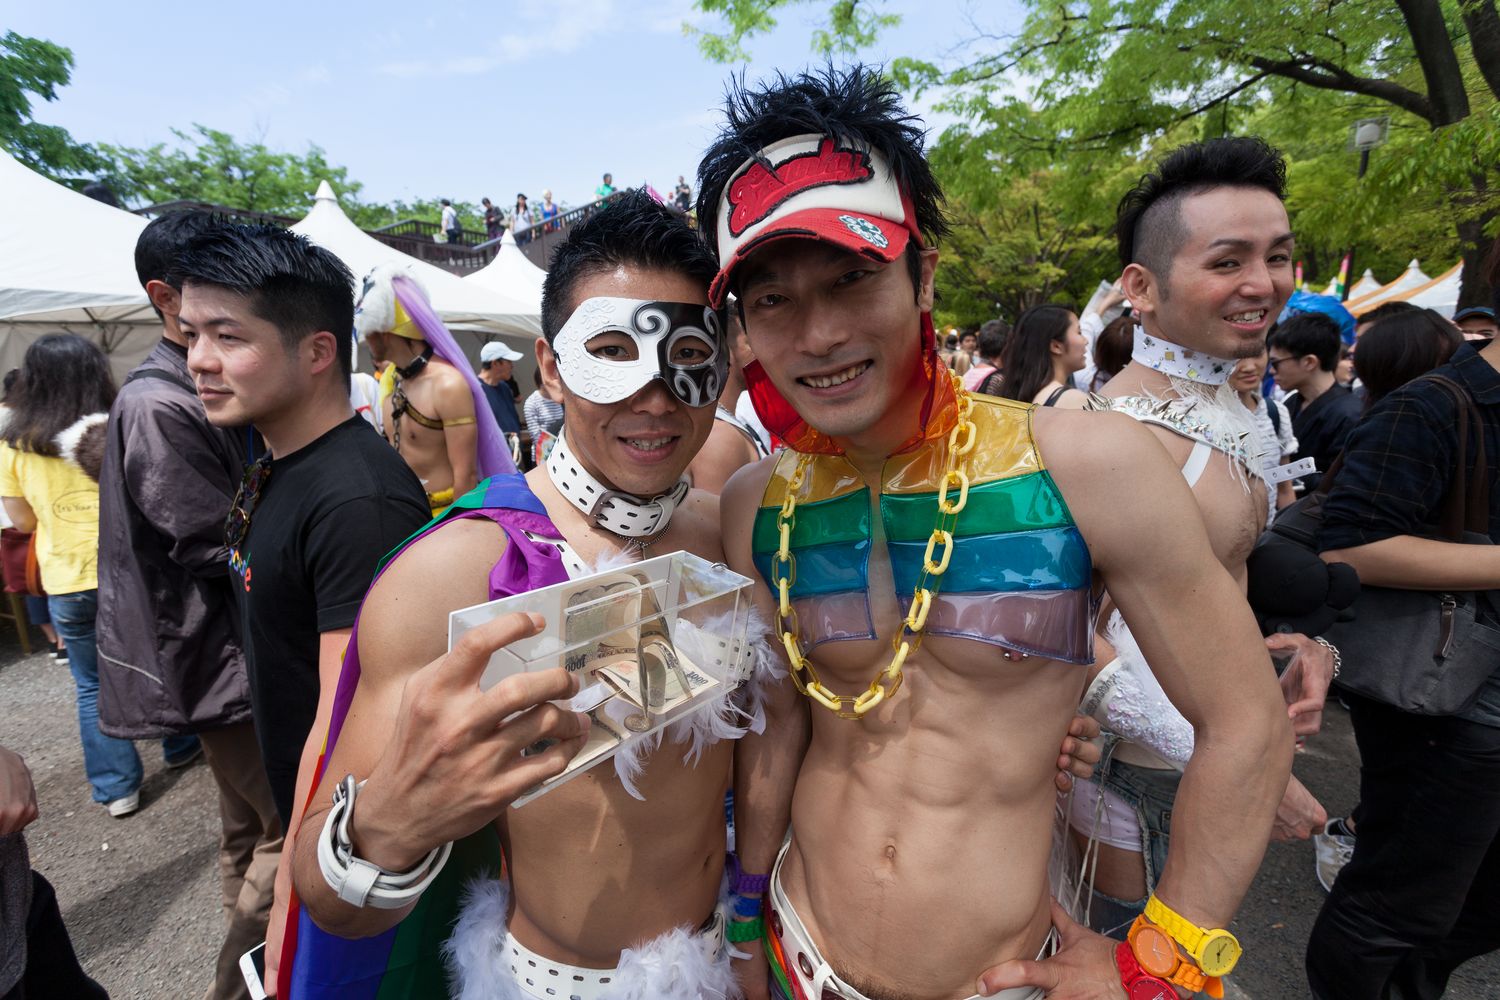 Japan has made toward LGBT equality: In 2016, even the country’s conservati...